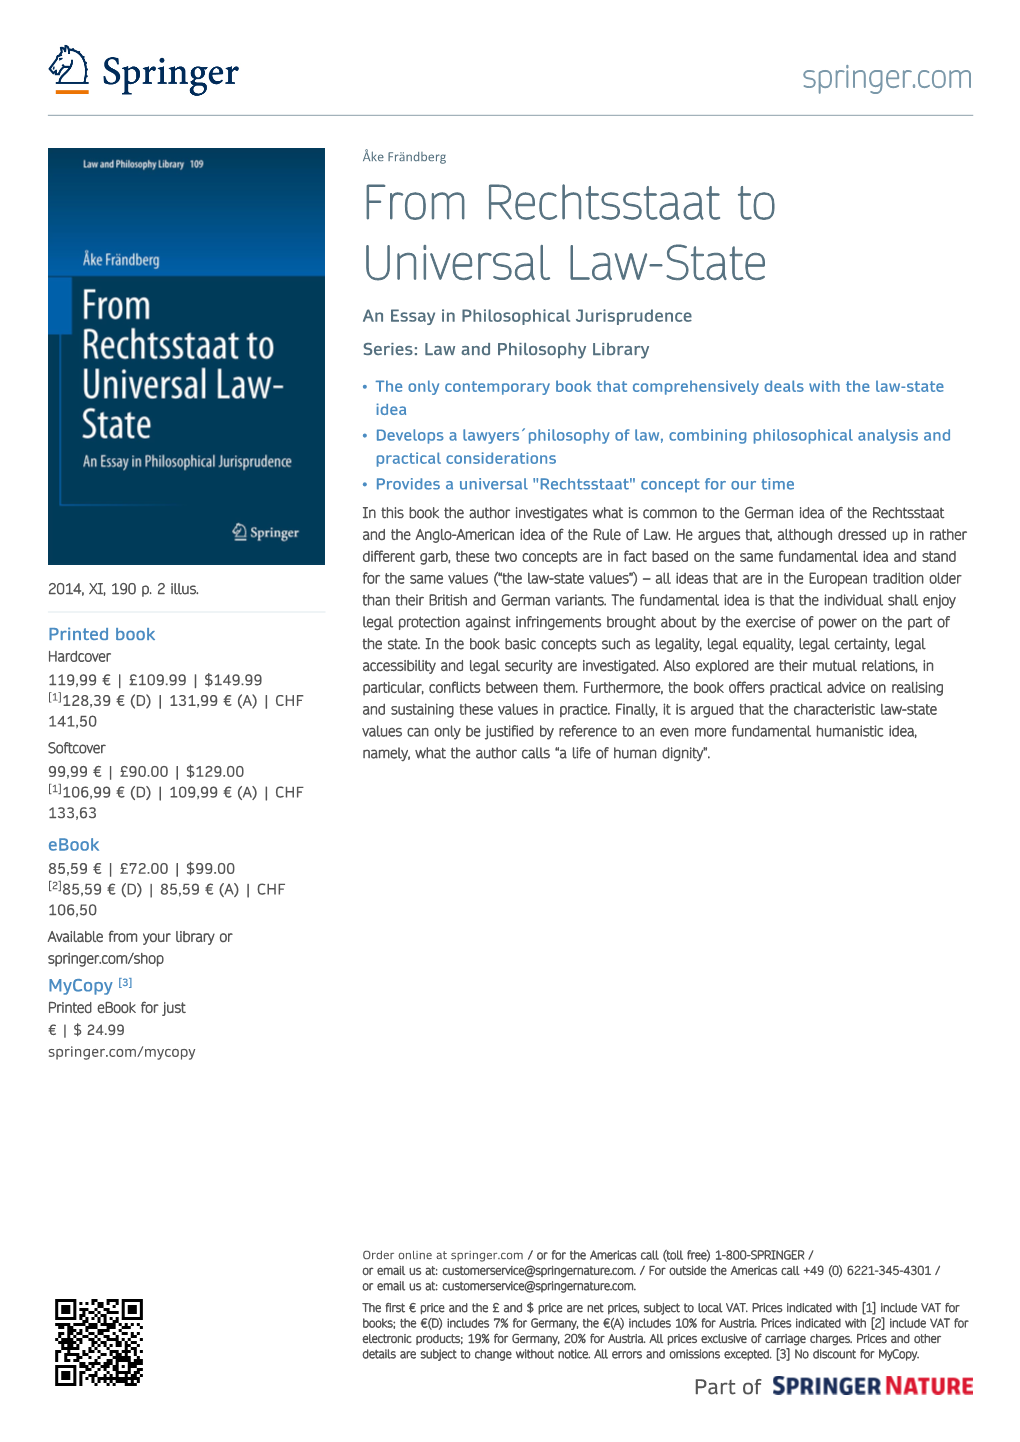 From Rechtsstaat to Universal Law-State an Essay in Philosophical Jurisprudence Series: Law and Philosophy Library